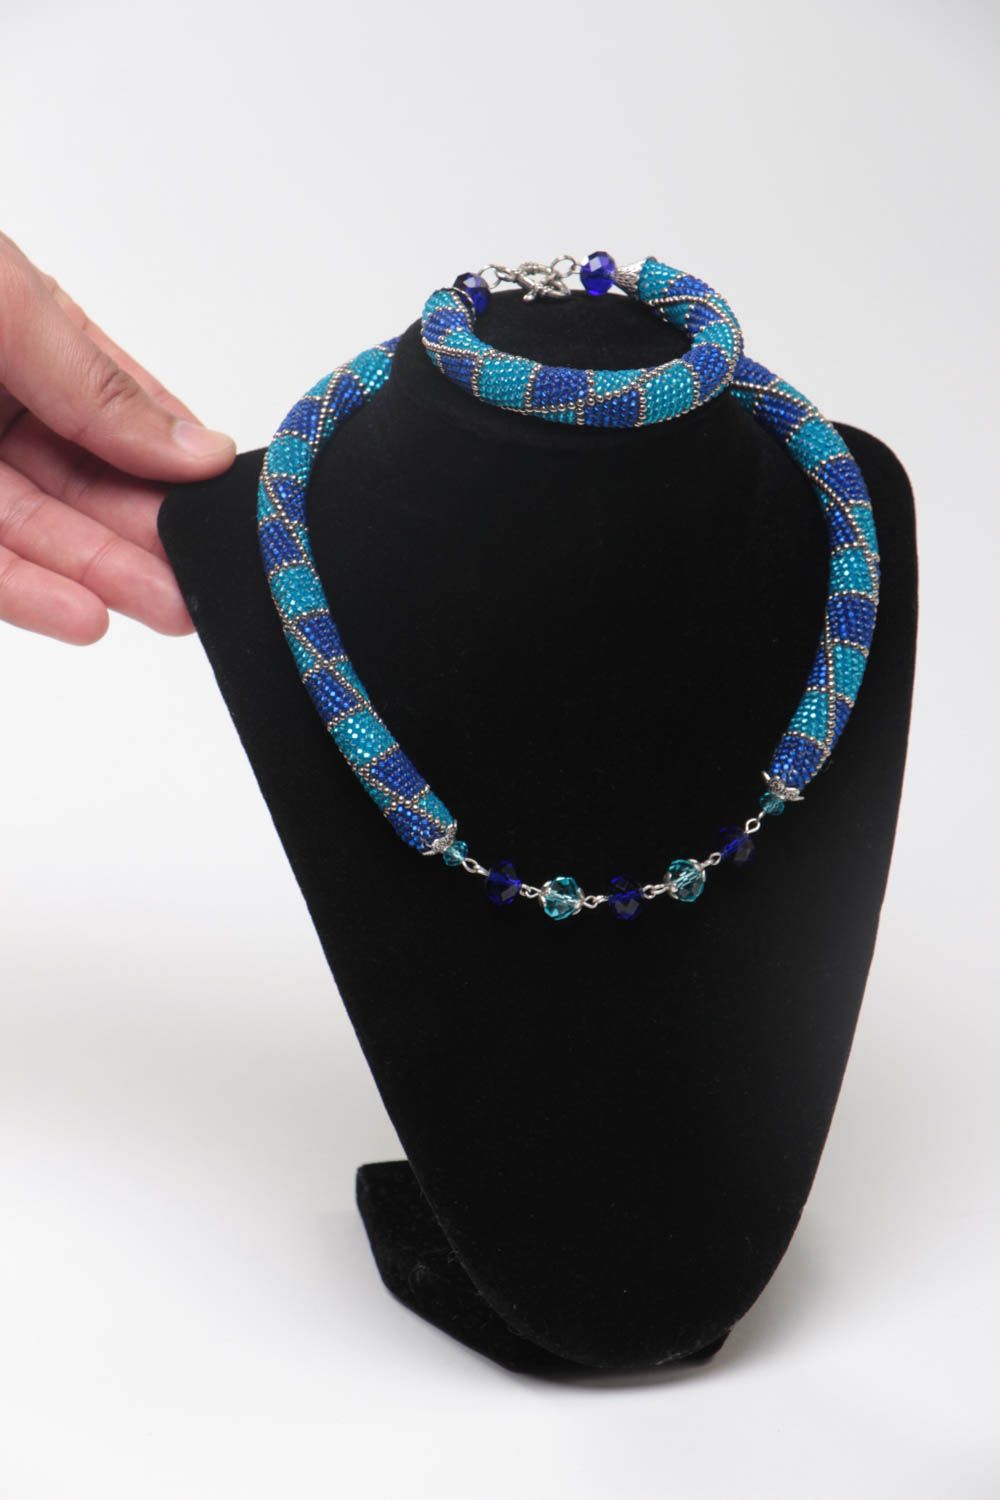 Set of handmade bead woven jewelry in blue color necklace and wrist bracelet photo 5